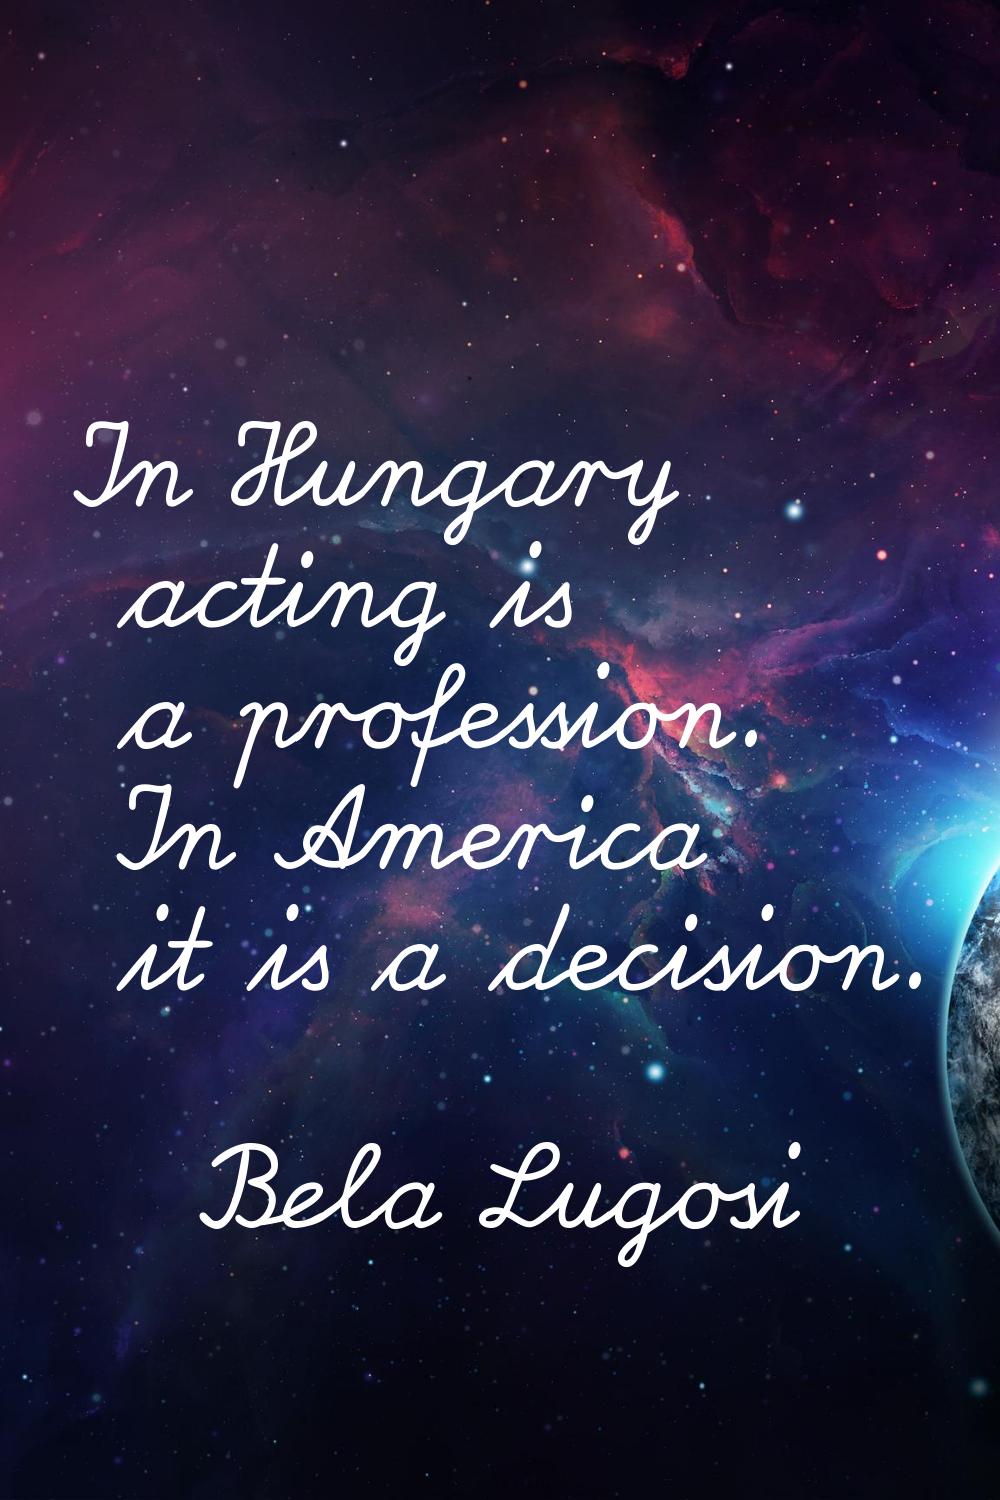 In Hungary acting is a profession. In America it is a decision.